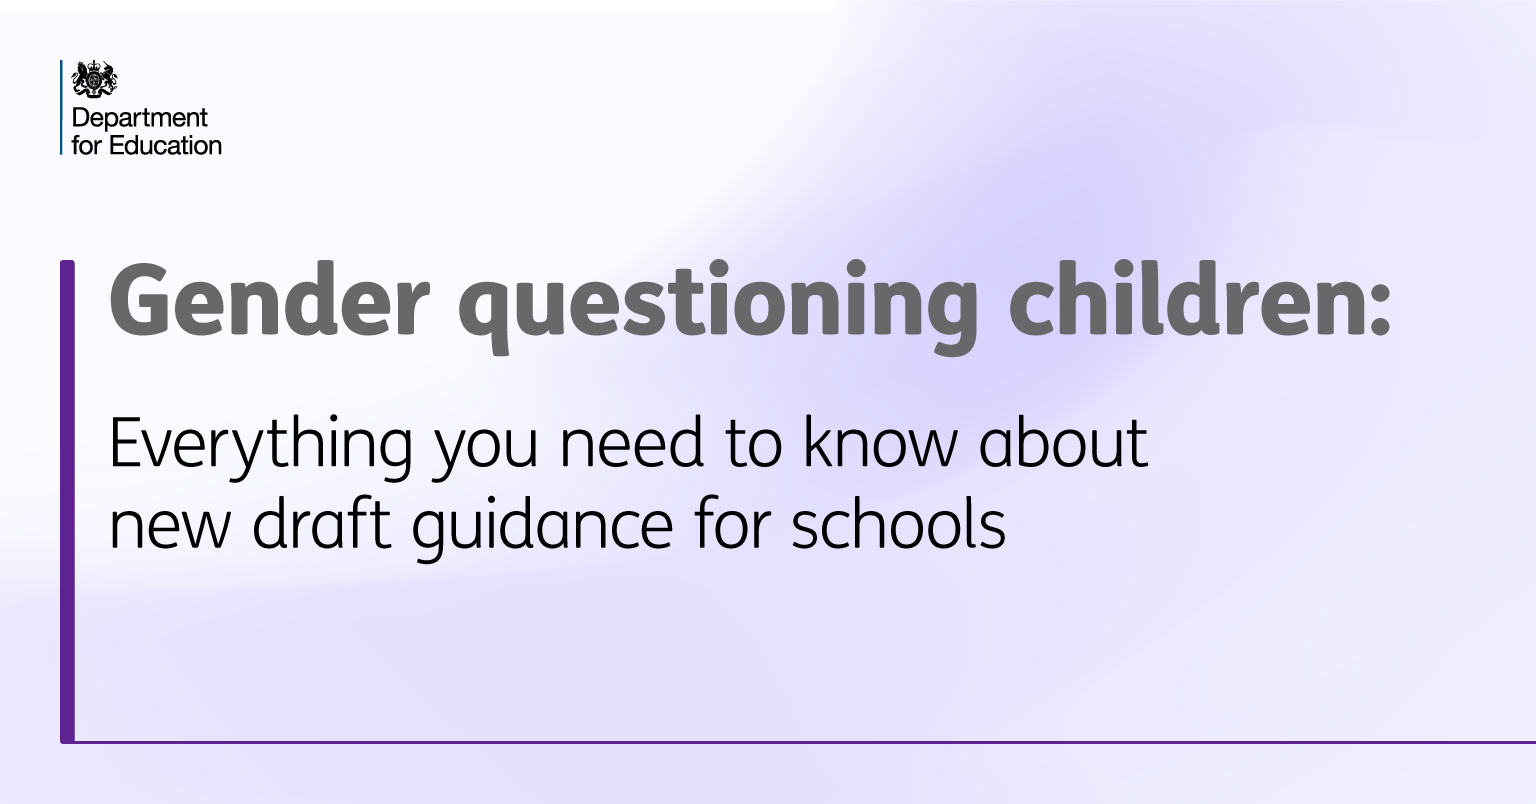 Gender questioning children: Everything you need to know about new draft guidance for schools